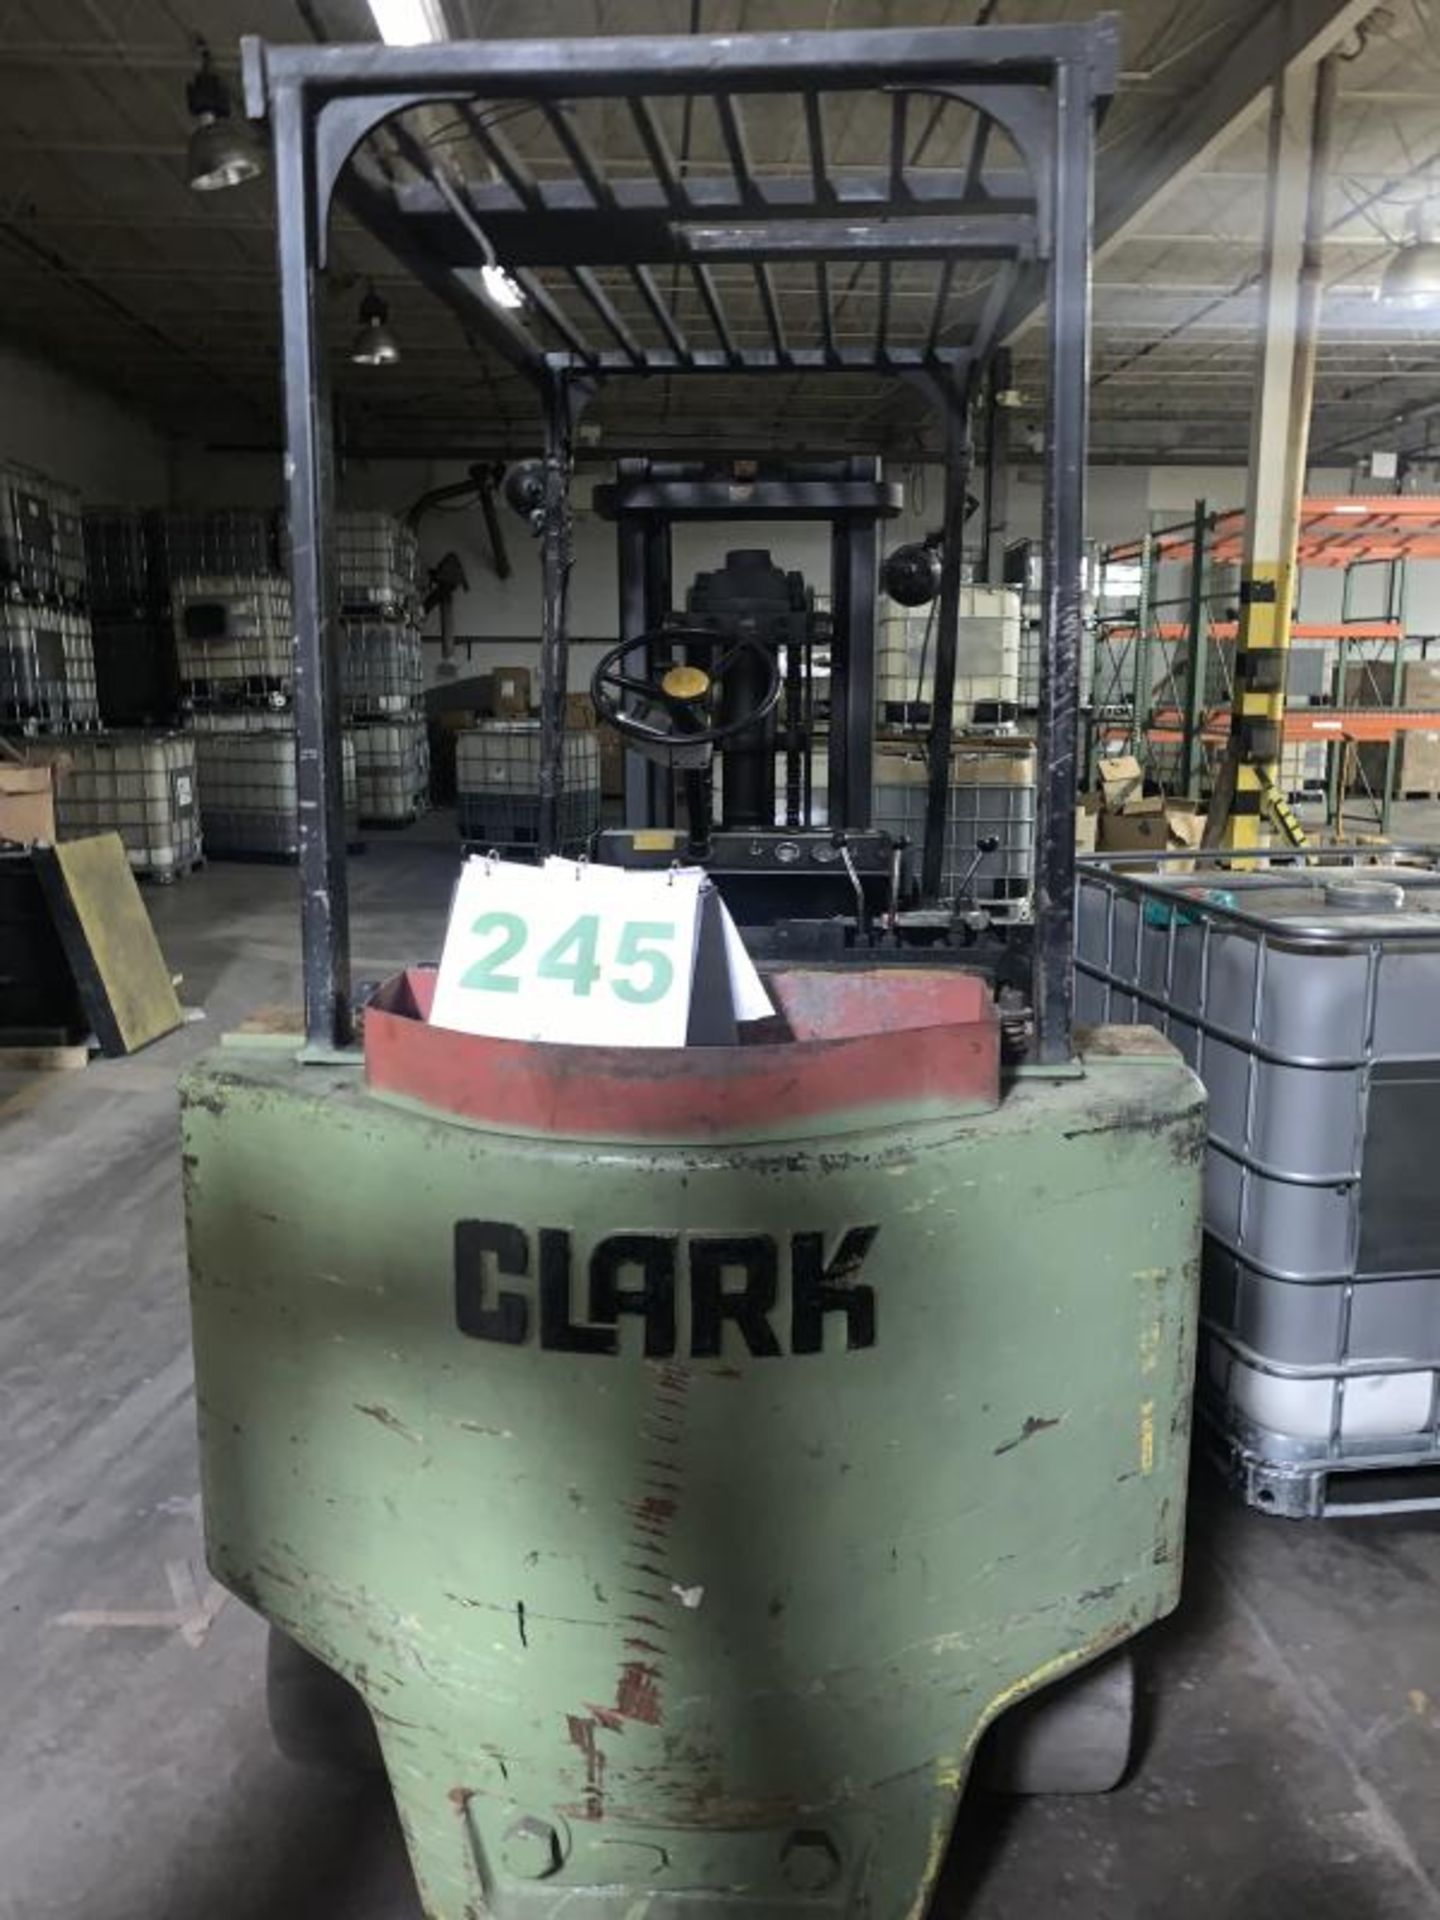 Clark Heavy duty 8000 pound Sit Down Forklift Truck battery operated and fully operational No